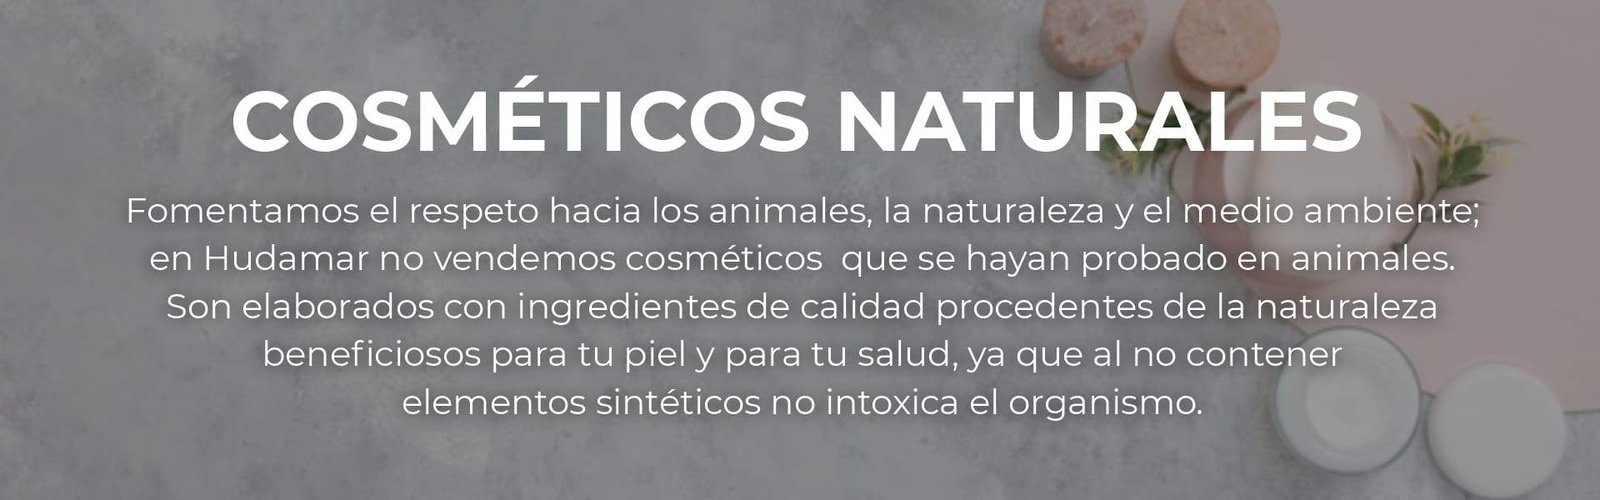 (2)Banner cosmeticos naturales